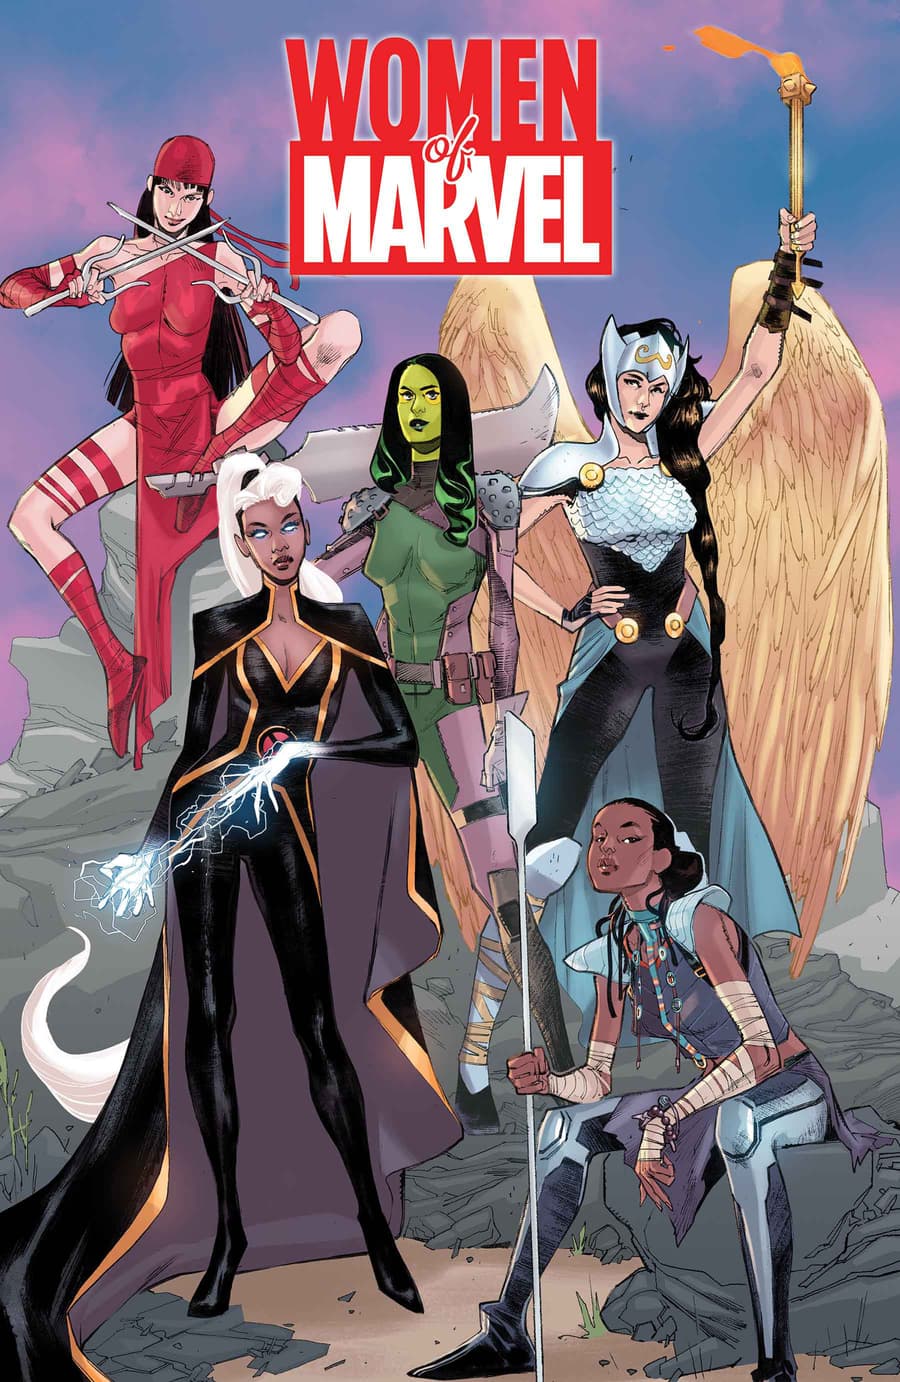 WOMEN OF MARVEL #1 Cover by SARA PICHELLI